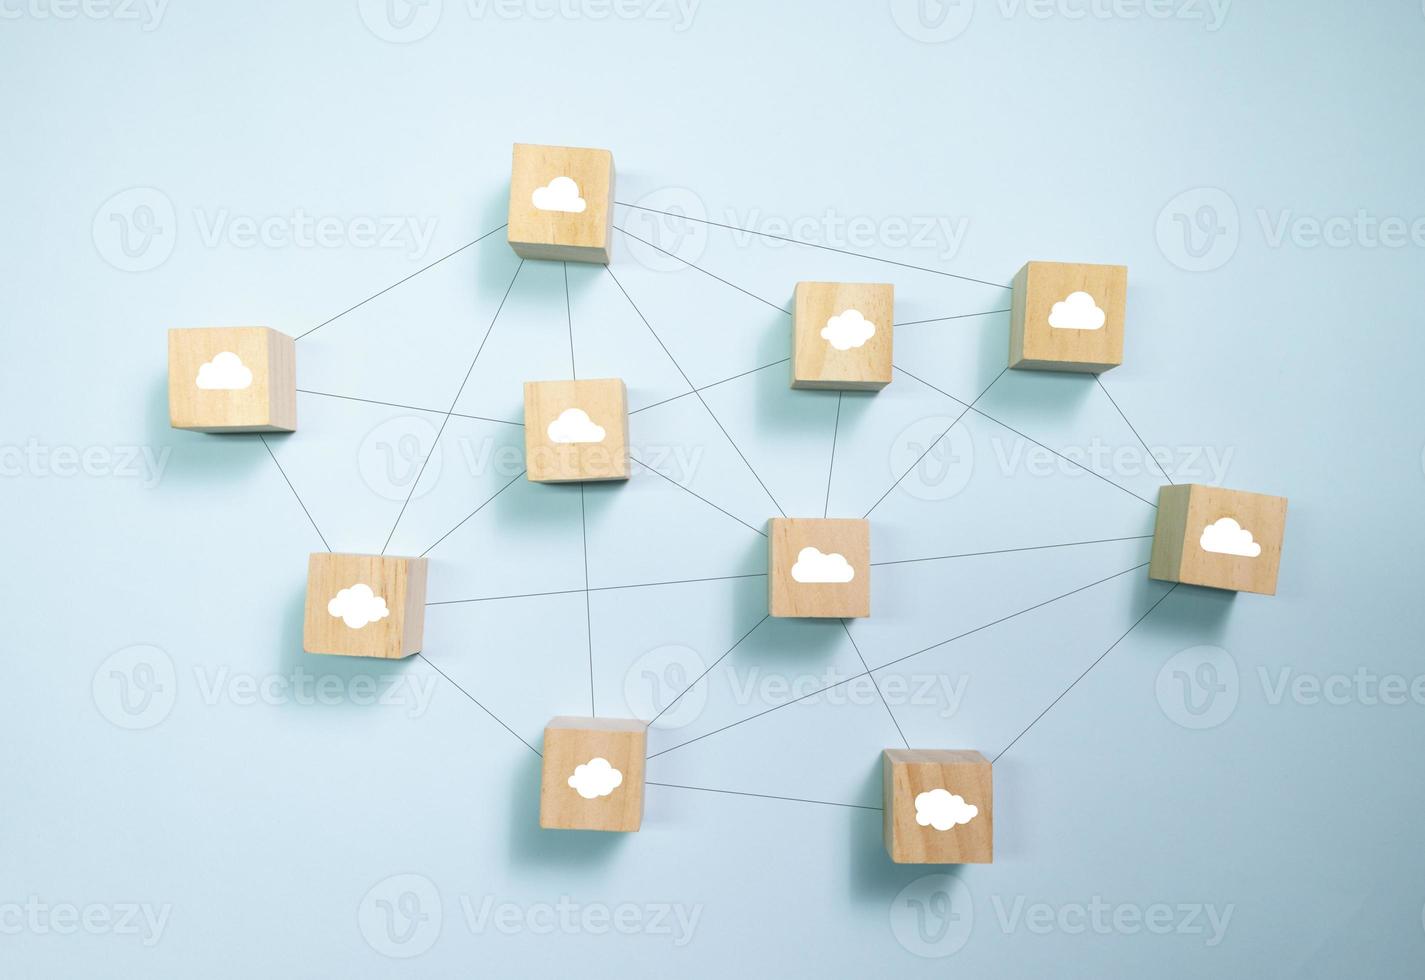 Top view wooden blocks with cloud icon set  to circle. Concept for cloud computing technology. photo